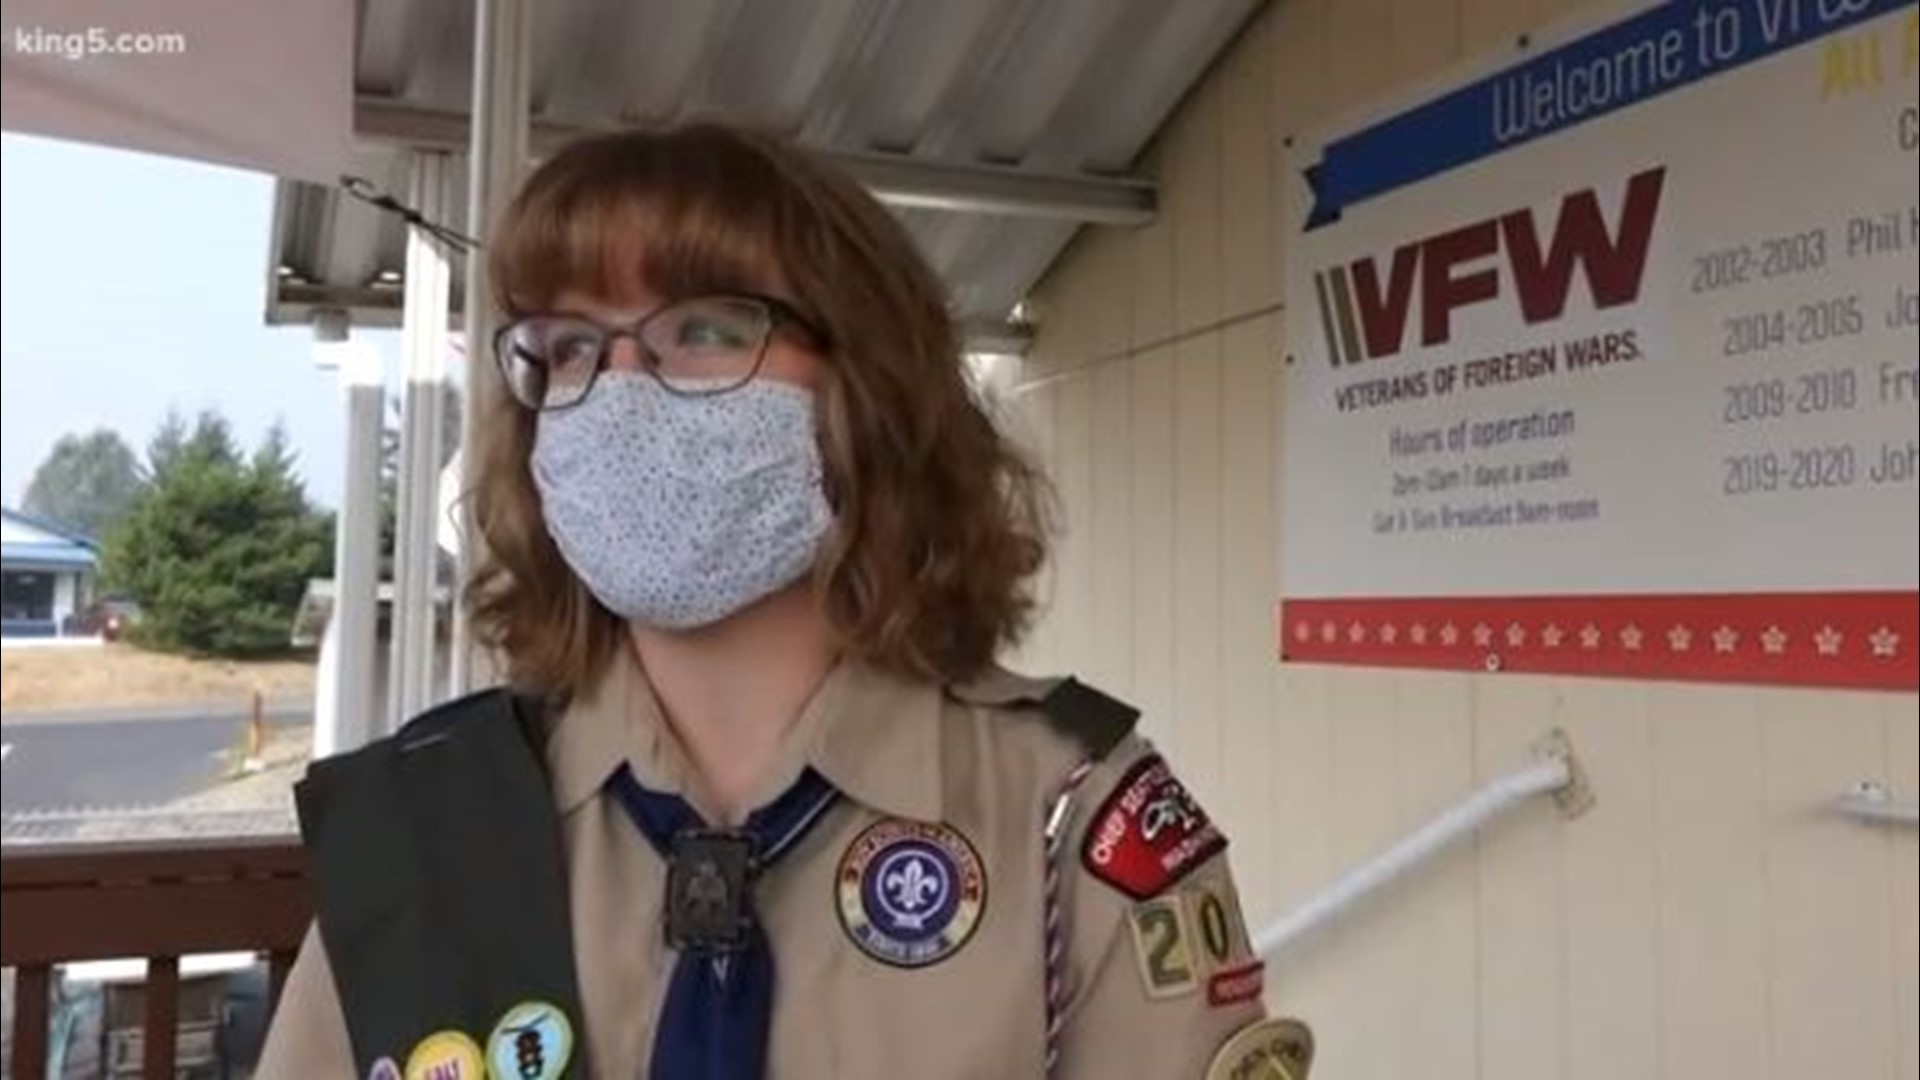 Sarah Ross is working to become one of America's first female Eagle Scouts. She just completed a special project in time for dedication on September 11.